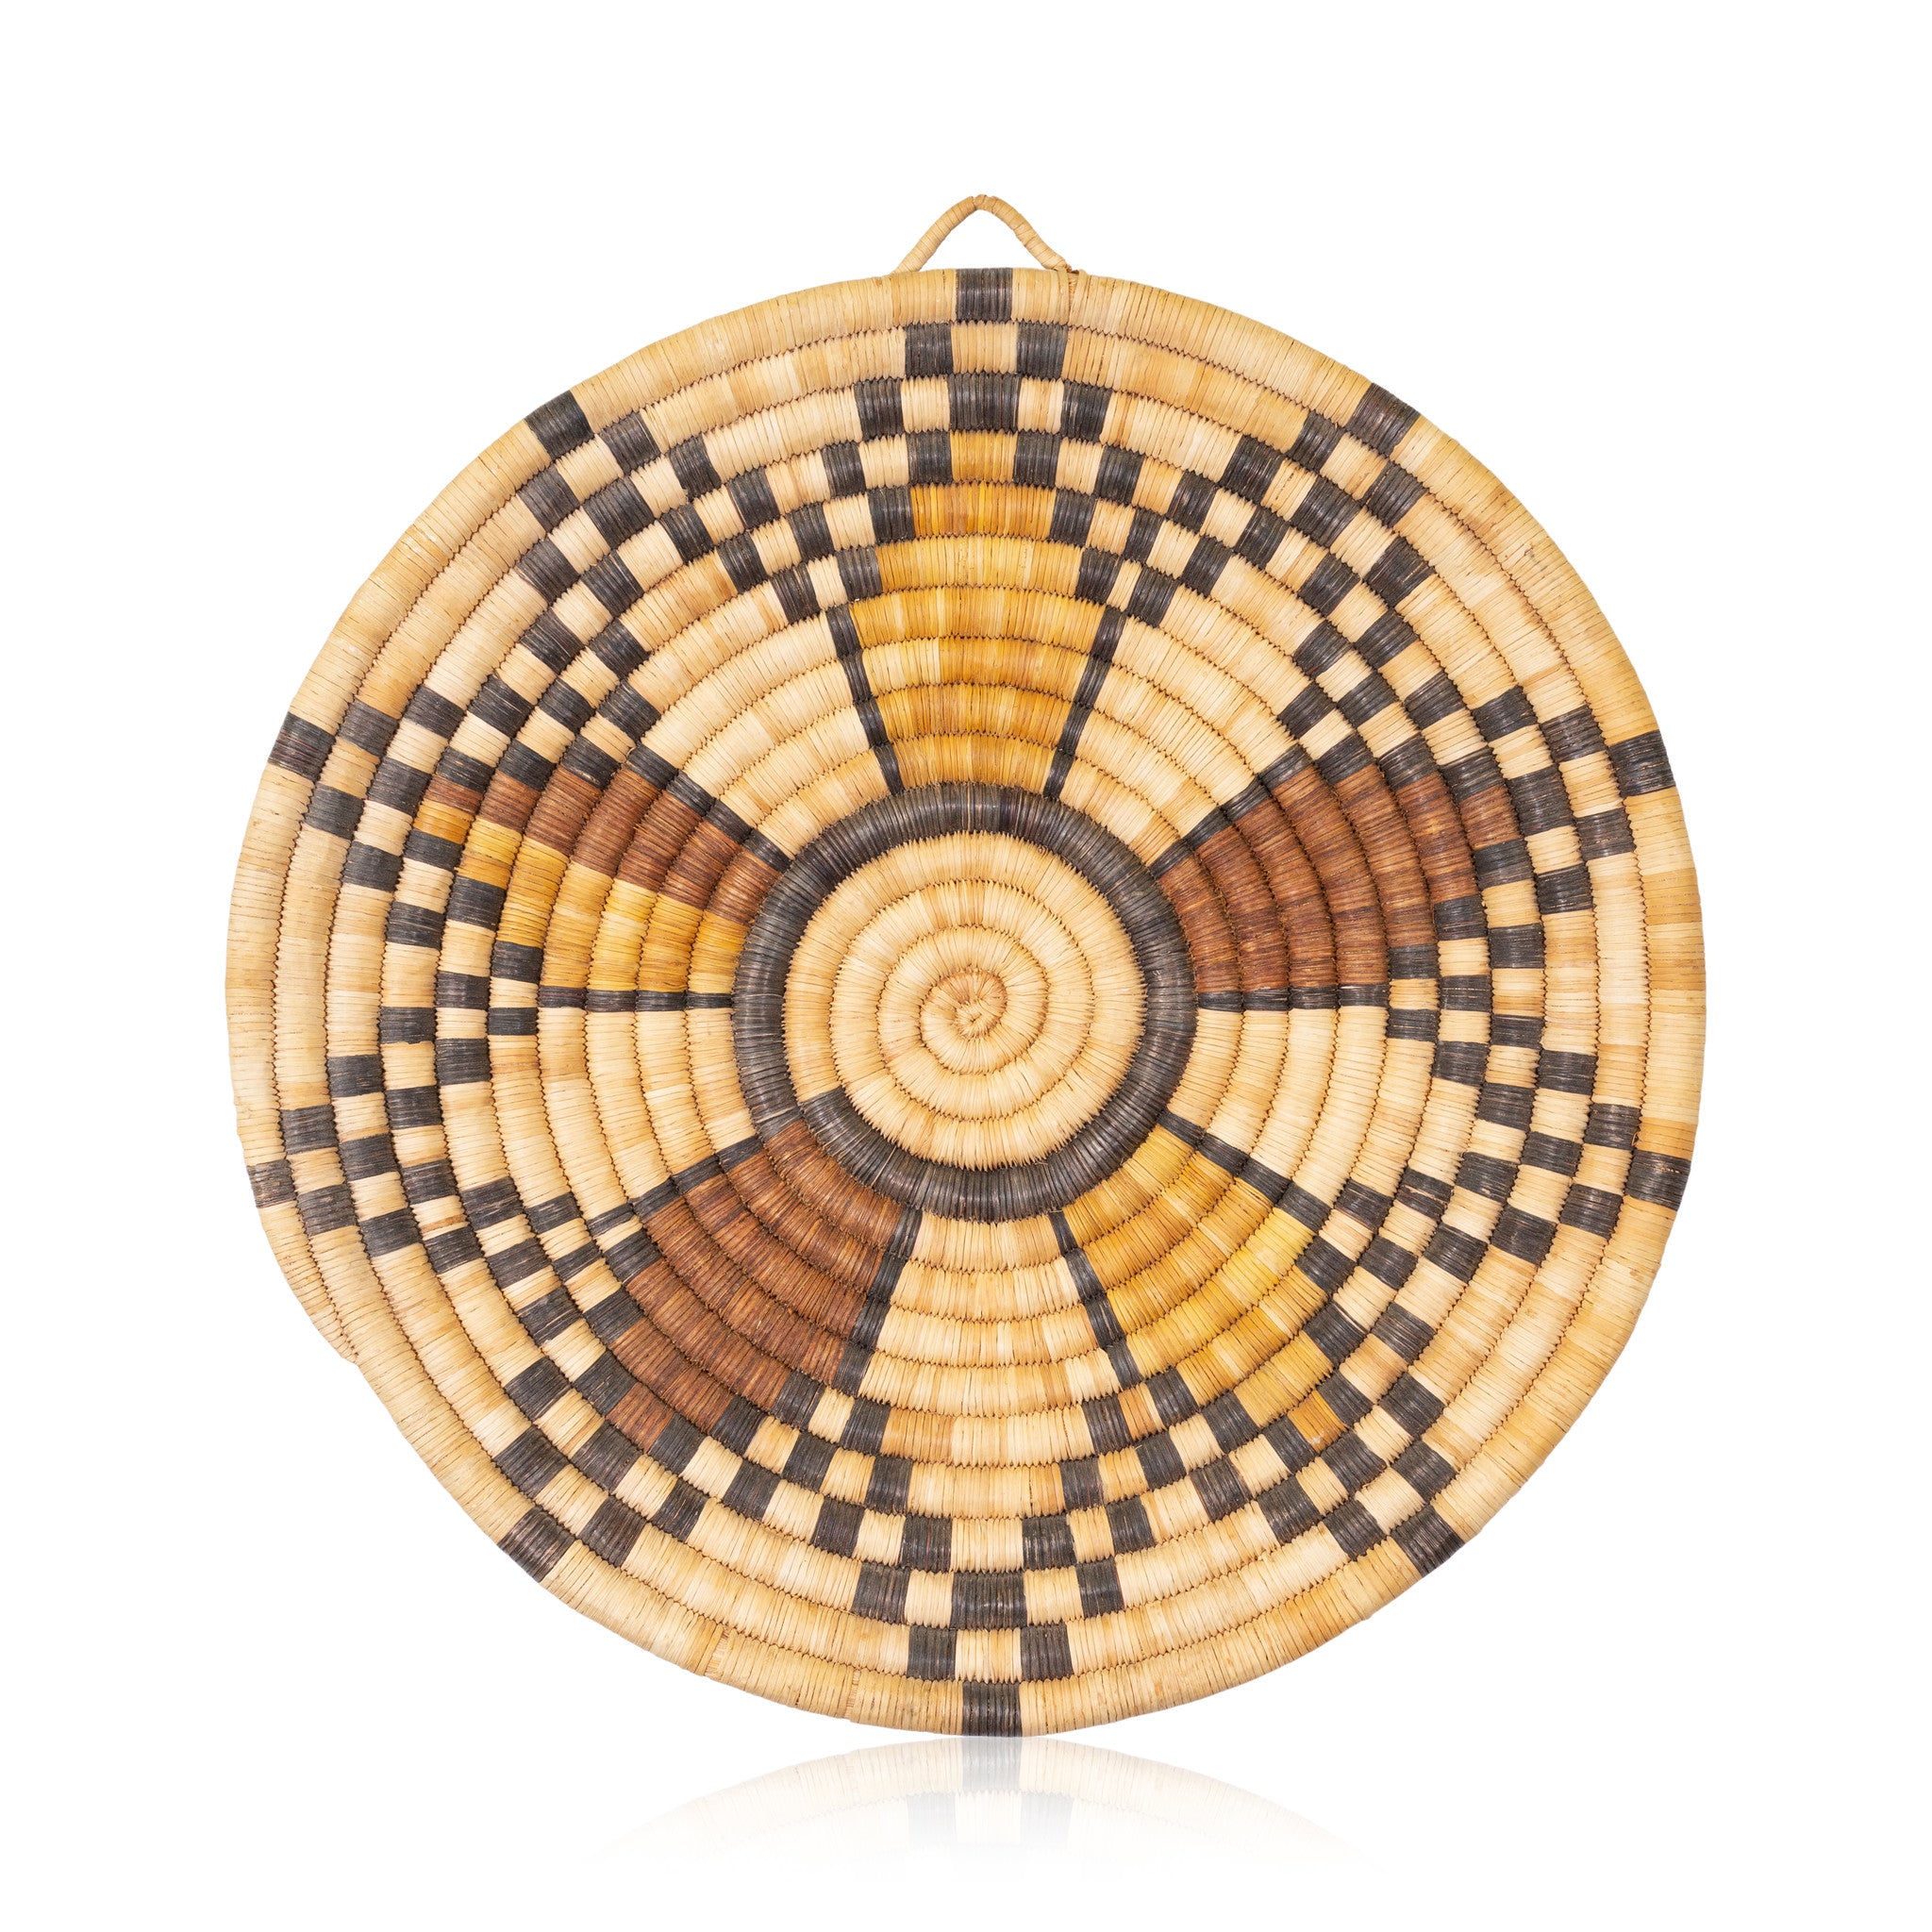 Hopi Coiled Plate, Native, Basketry, Plate